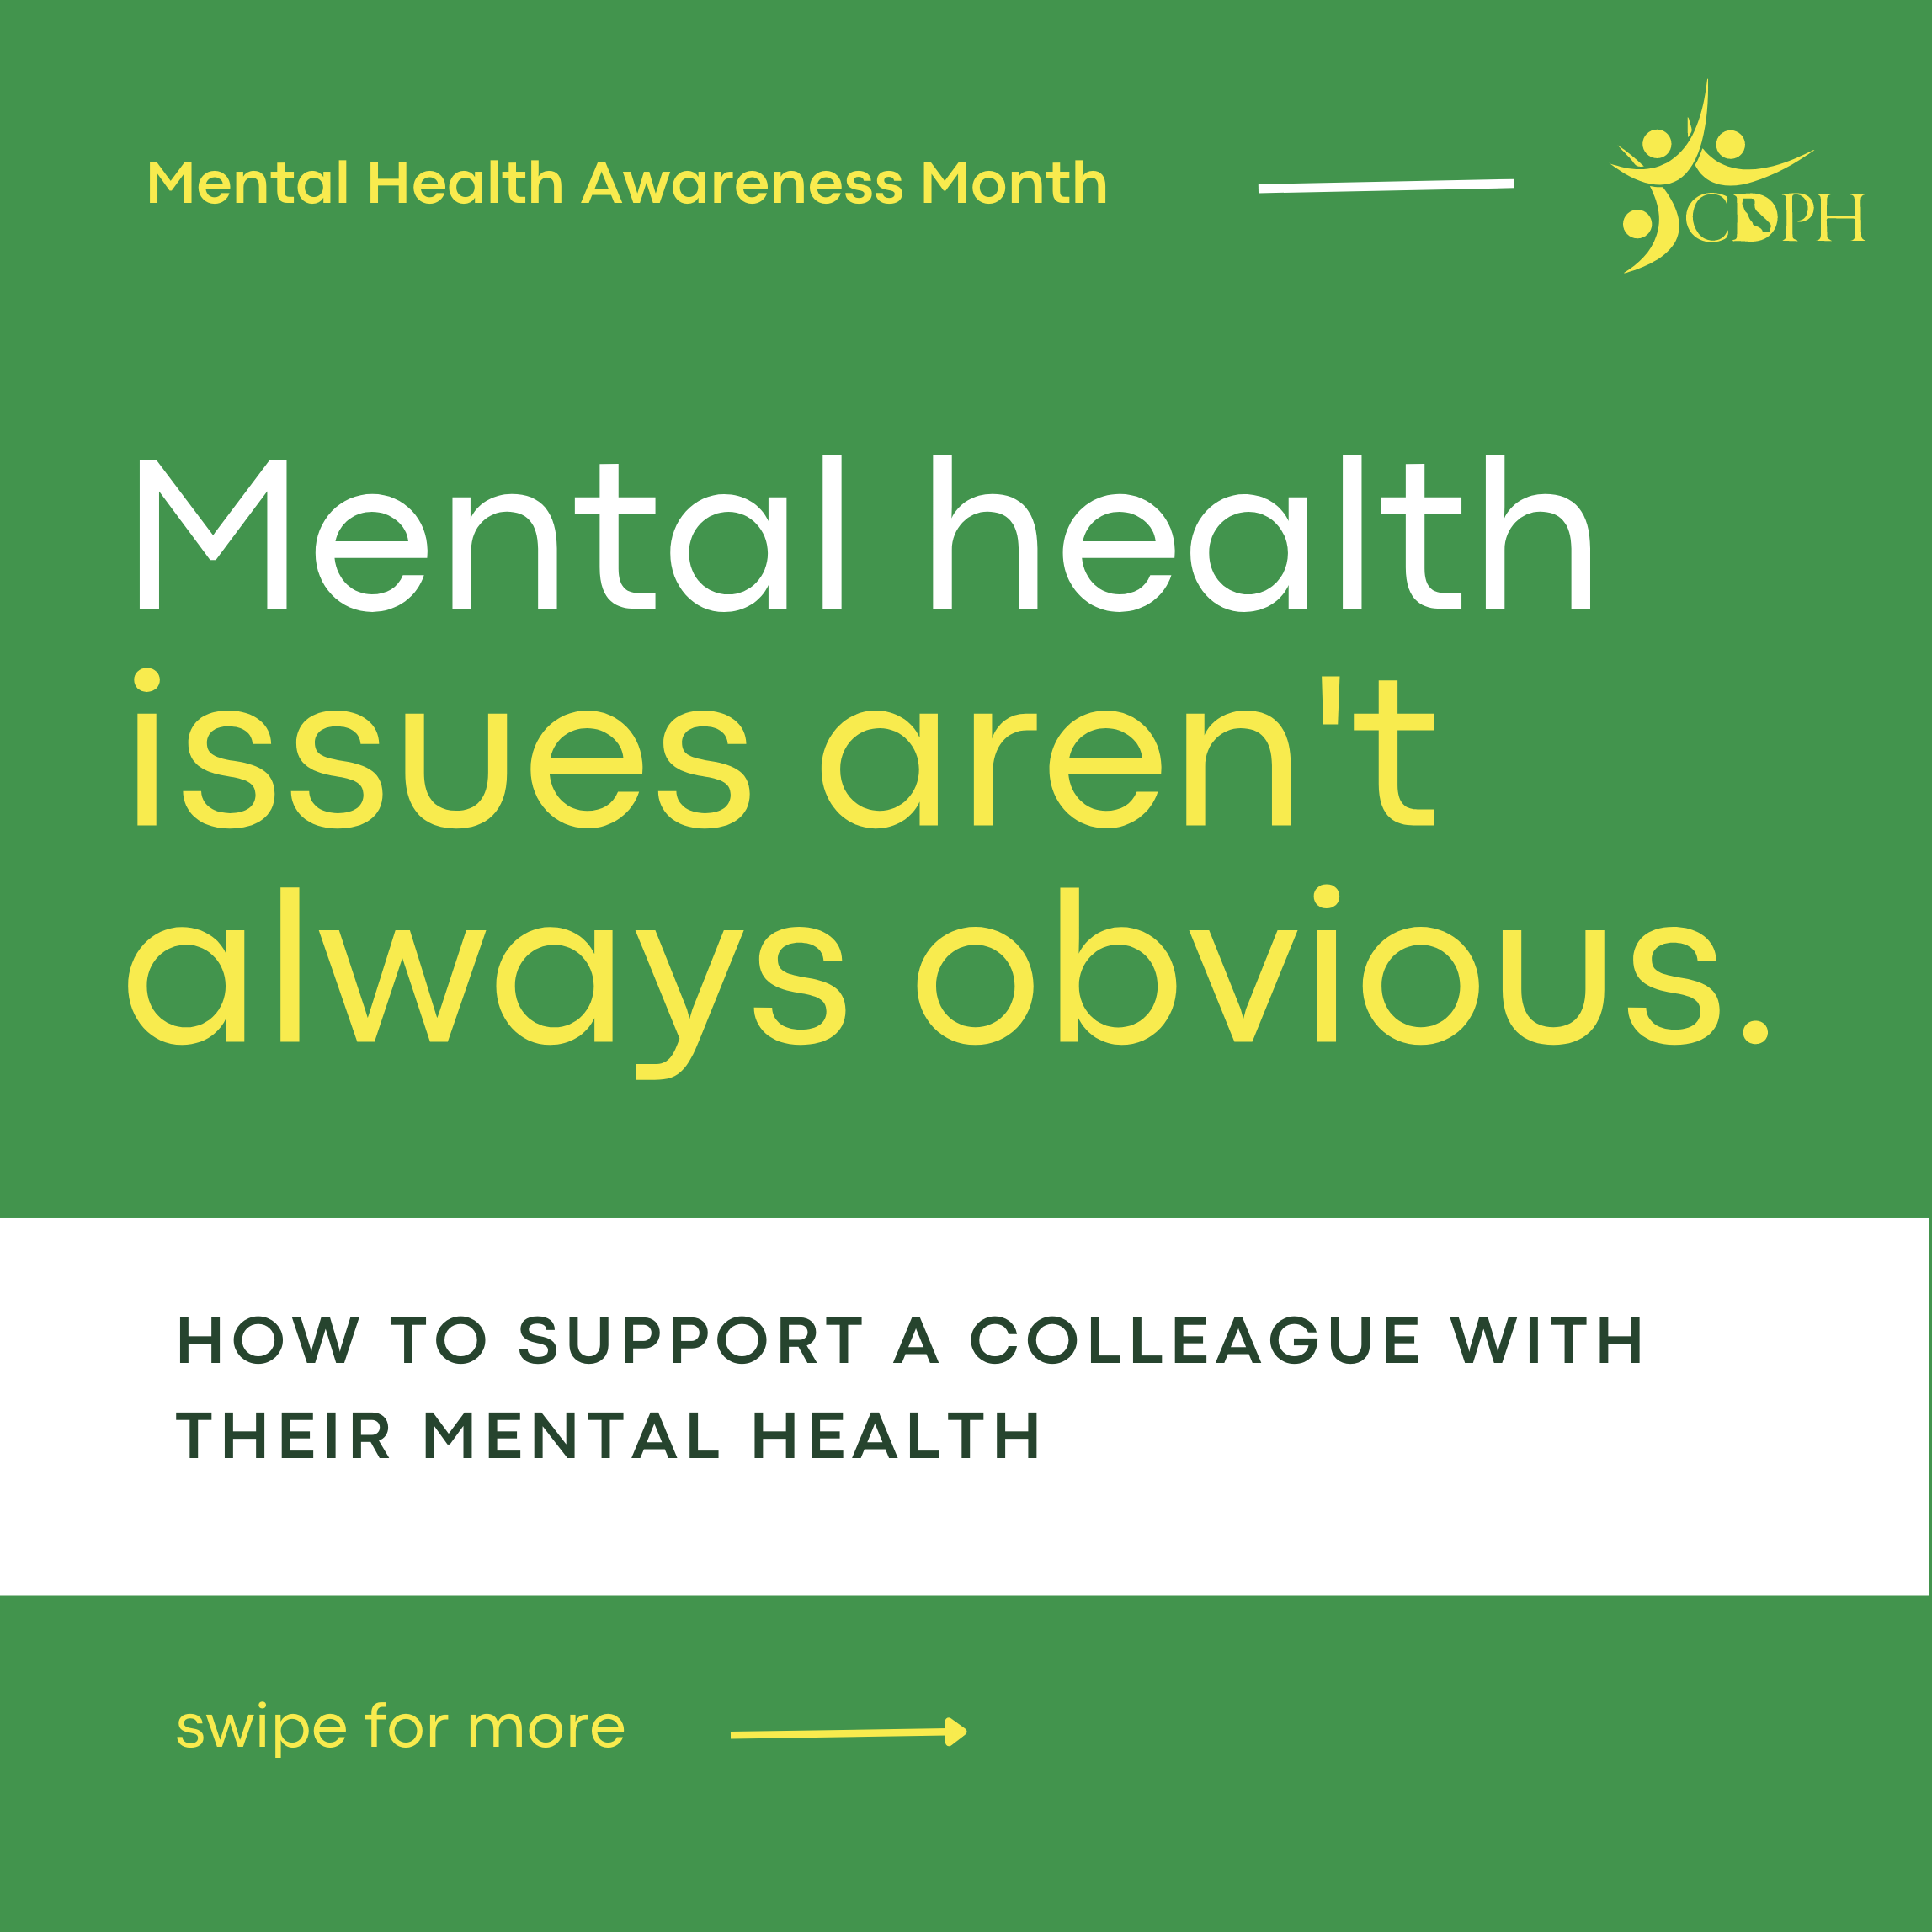 Mental health issues aren't always obvious